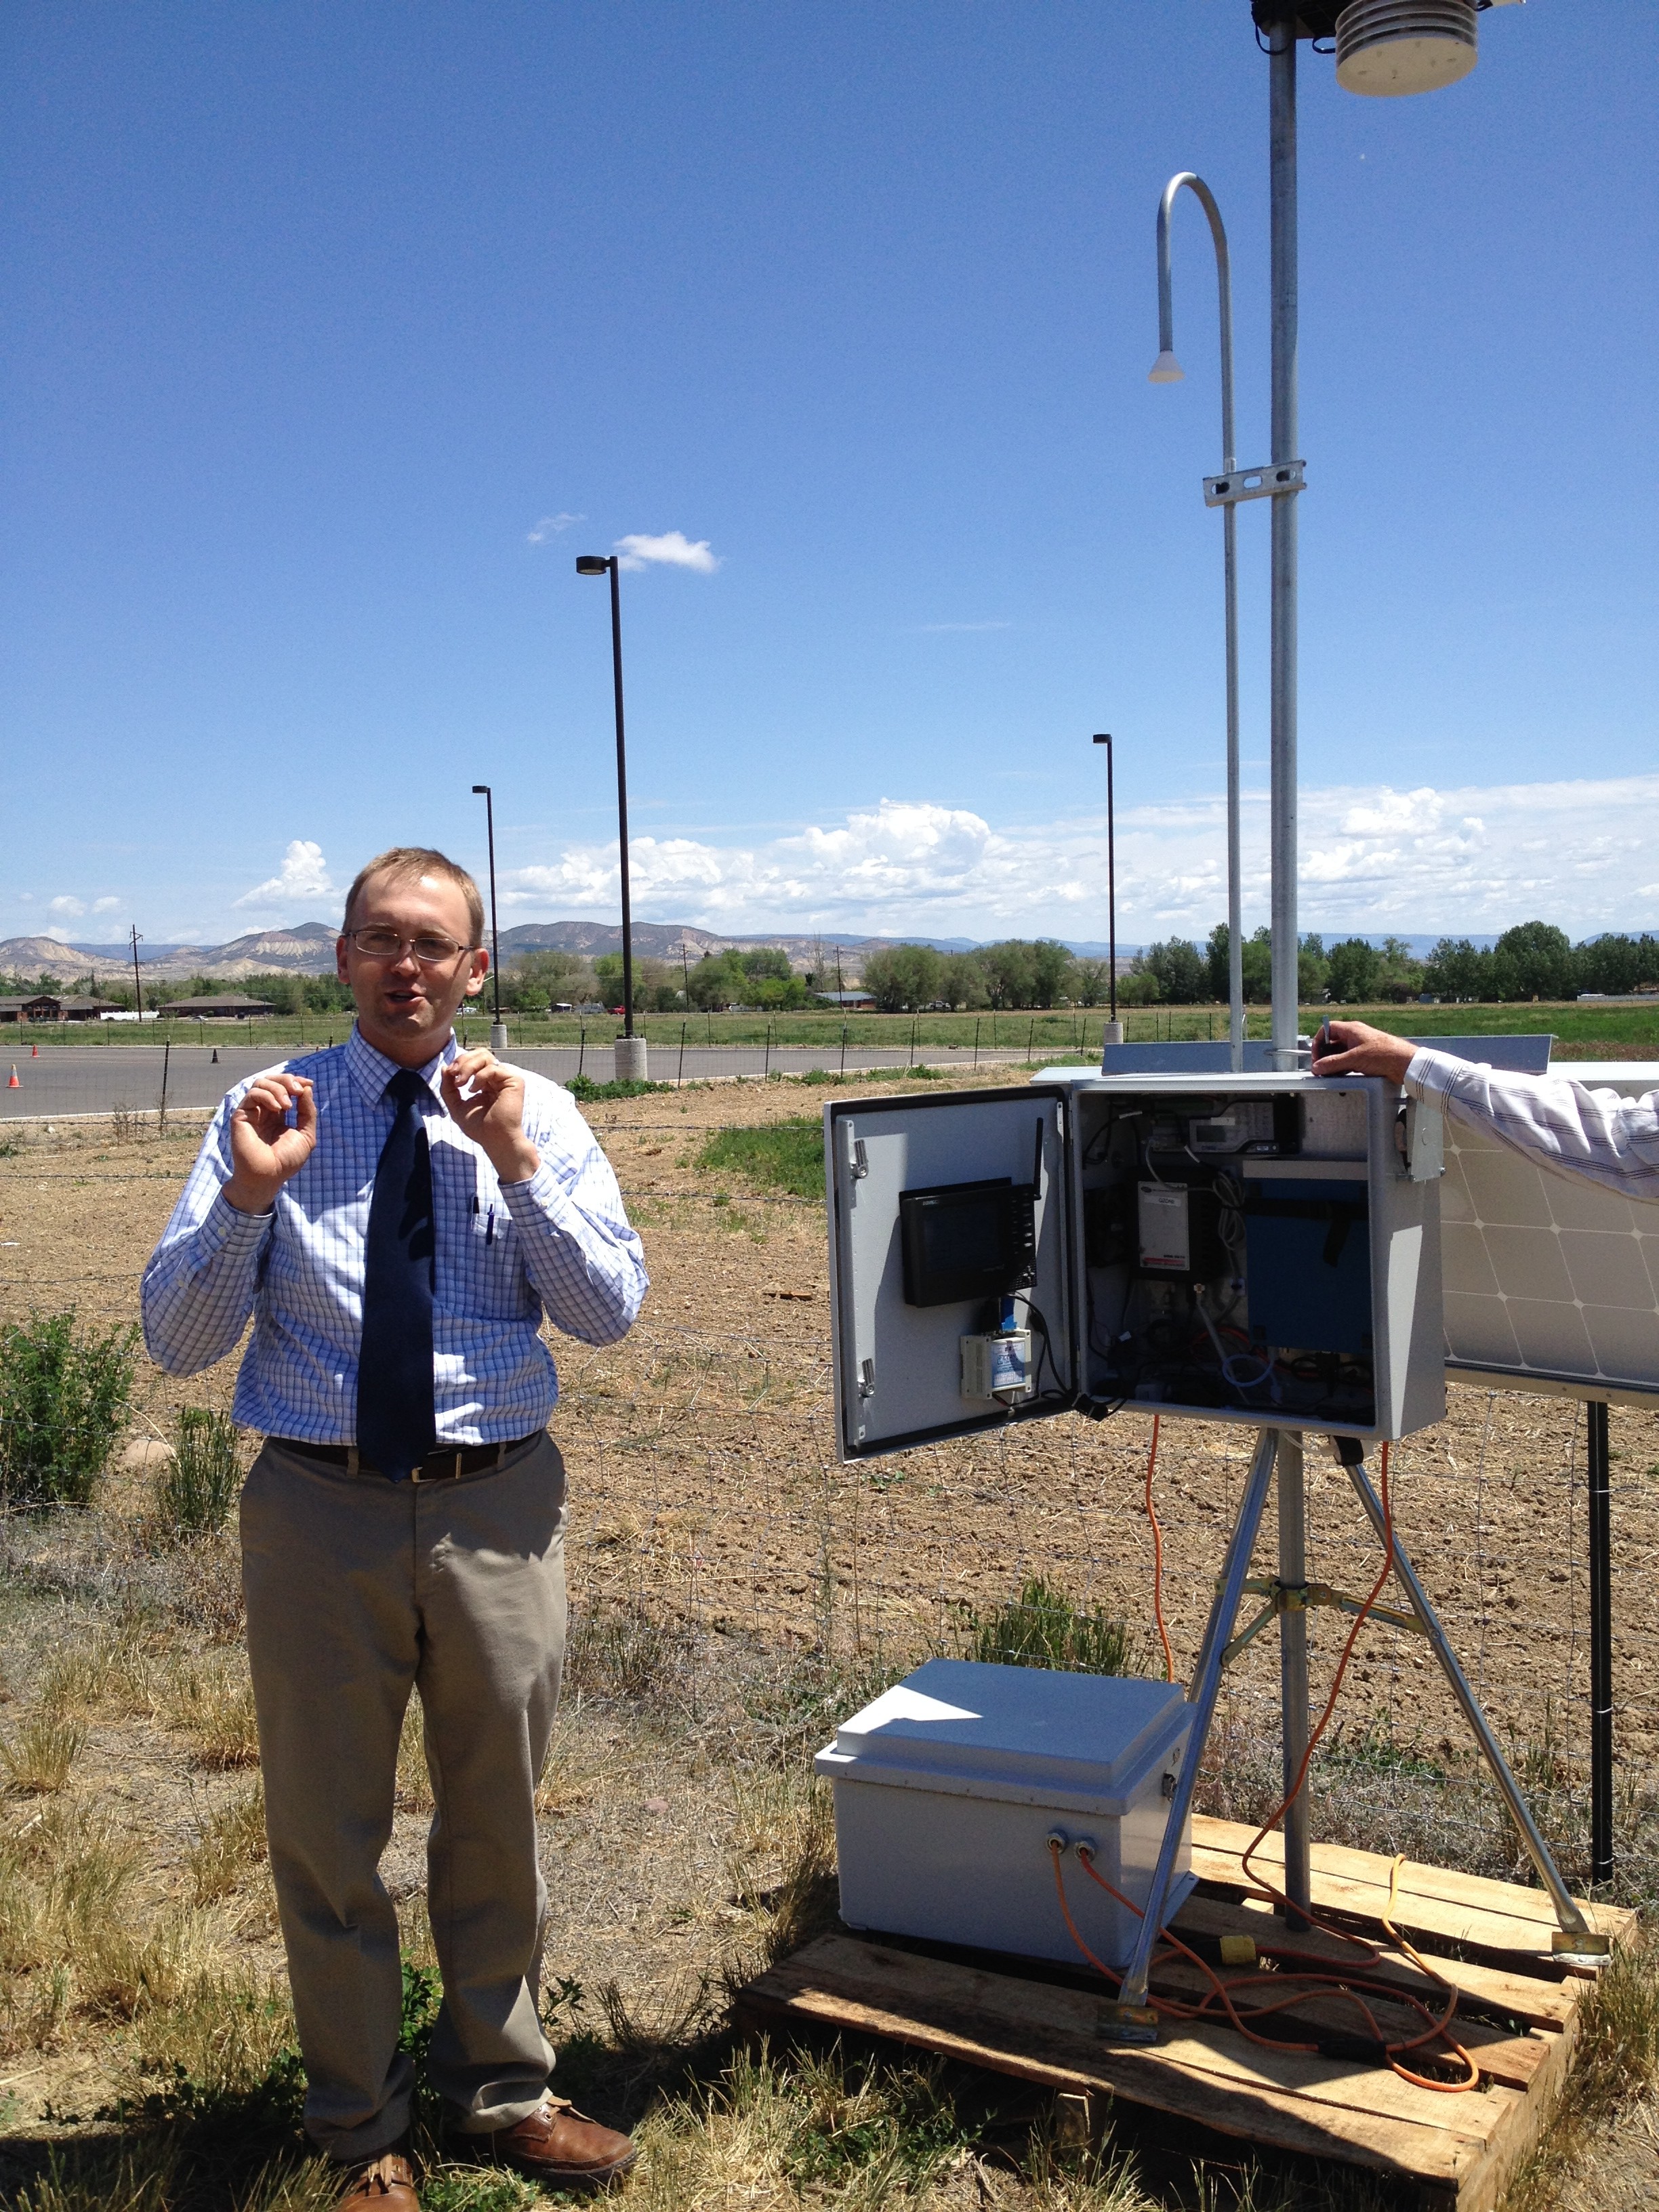 Utah State University researcher Seth Lyman stands next to an ozone monitor at the Bingham Research Center in Vernal.